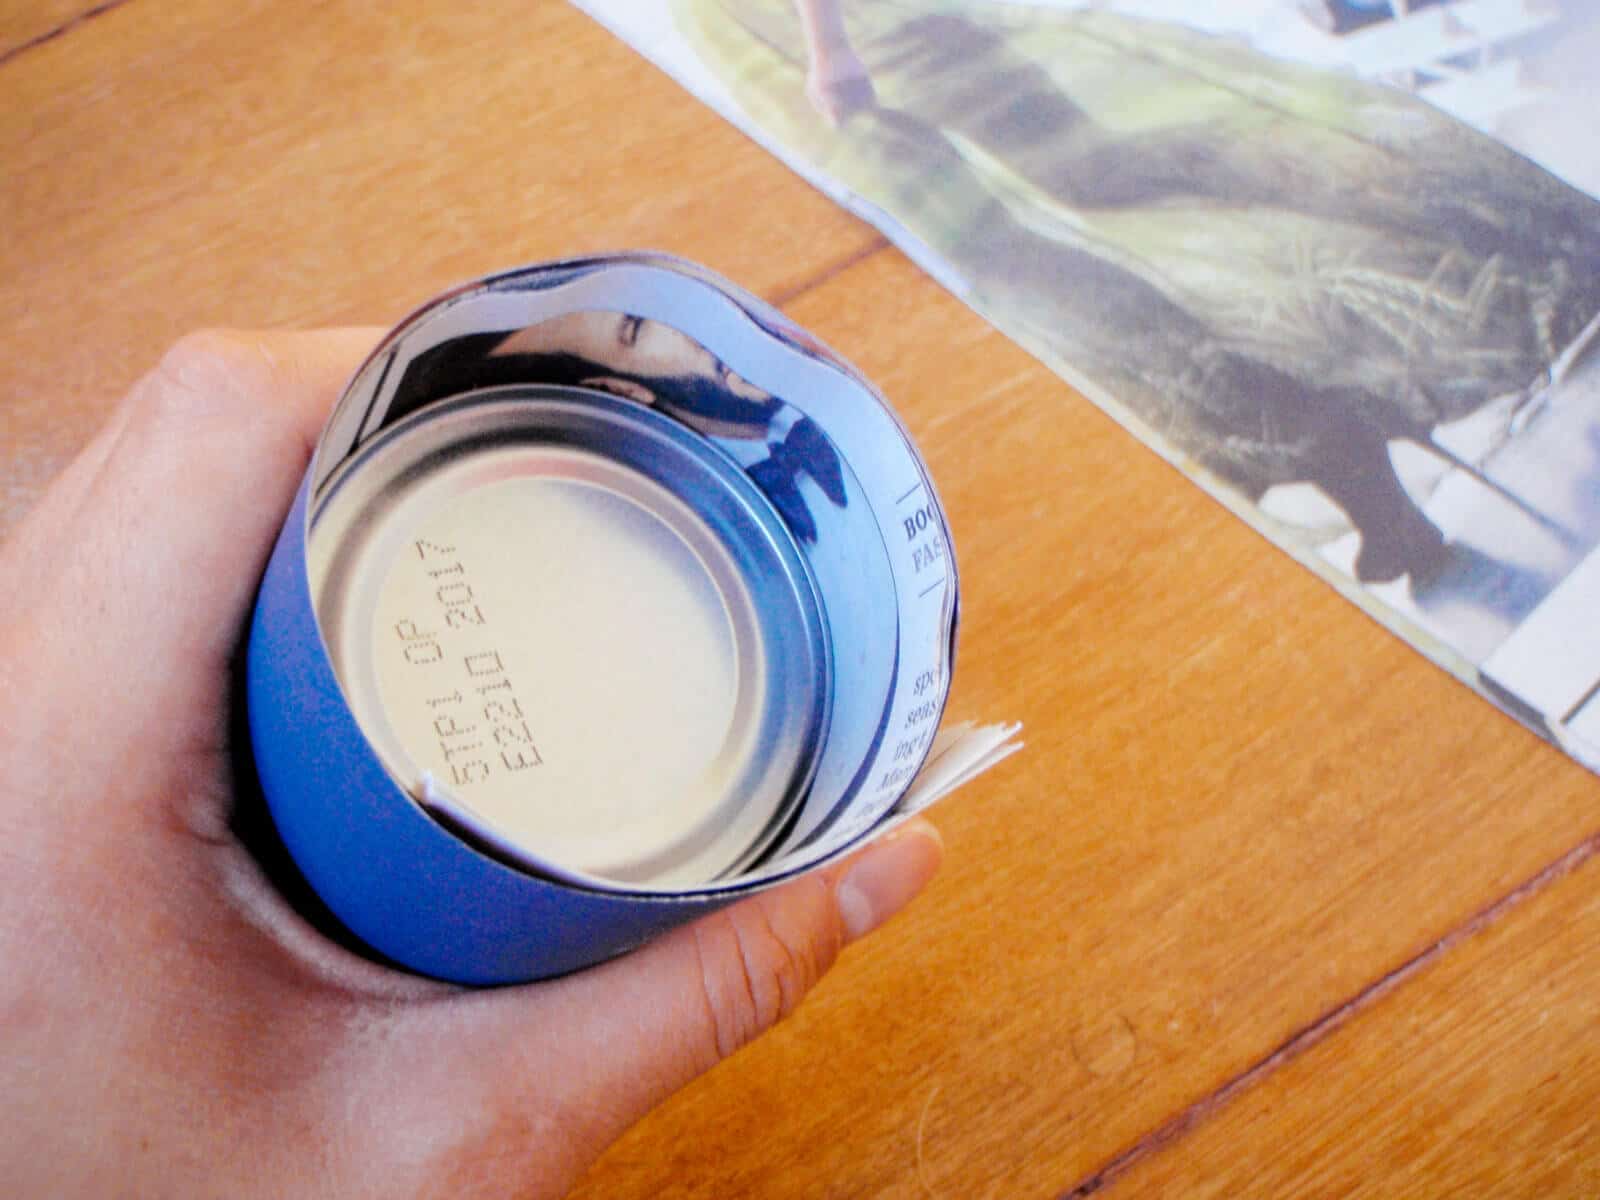 Make the bottom by folding the newspaper edge down over the can